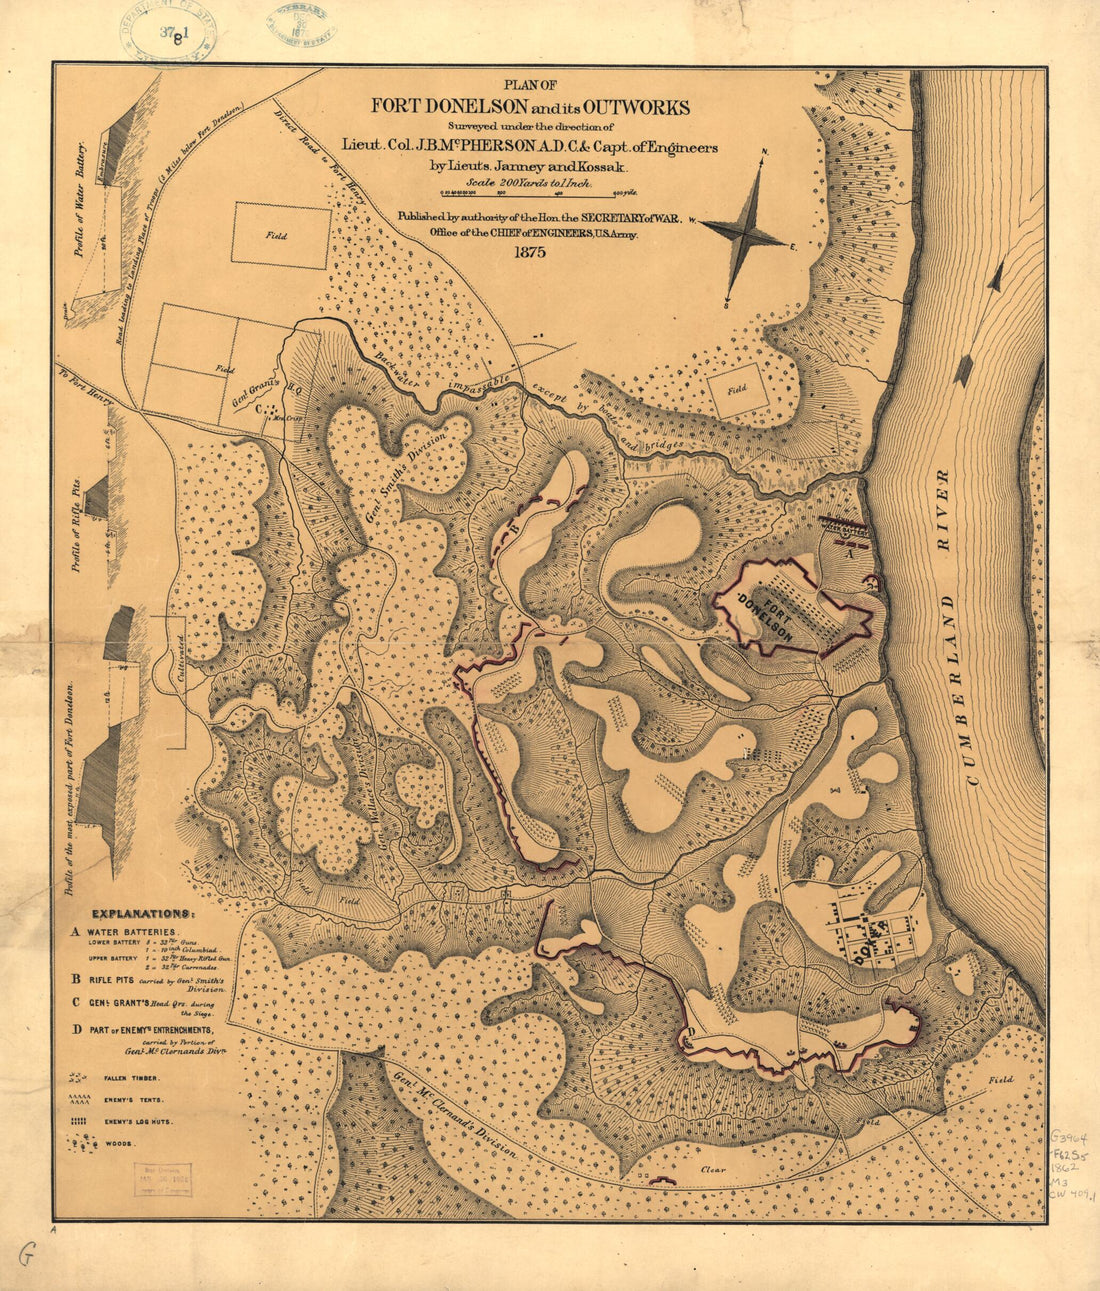 This old map of Plan of Fort Donelson and Its Outworks. Feb. 1862 from 1875 was created by James Birdseye McPherson in 1875